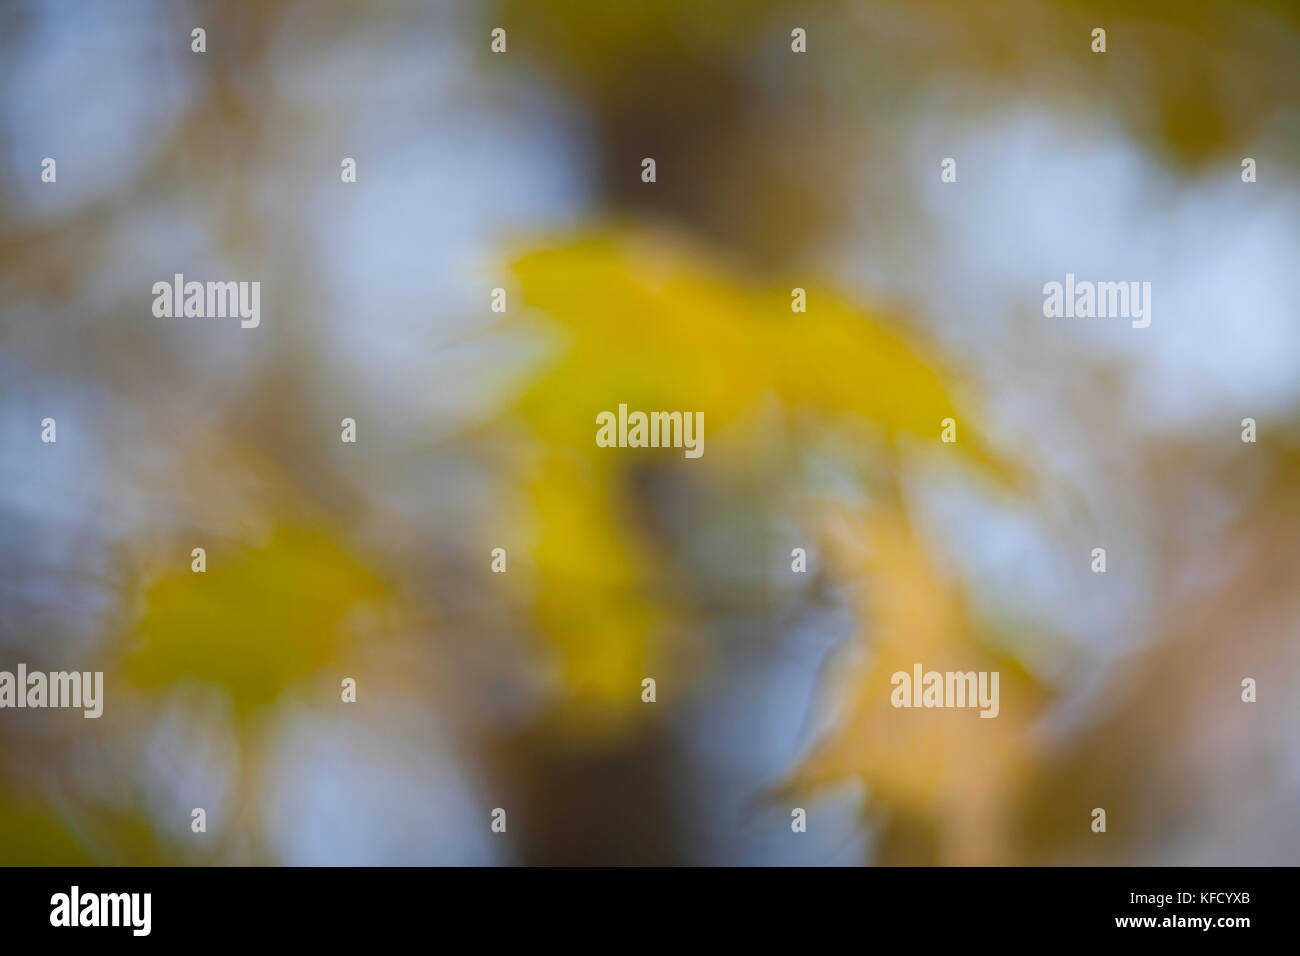 Blurred background with yellow autumn leaves. Beautiful bokeh.  Helios lens. Stock Photo